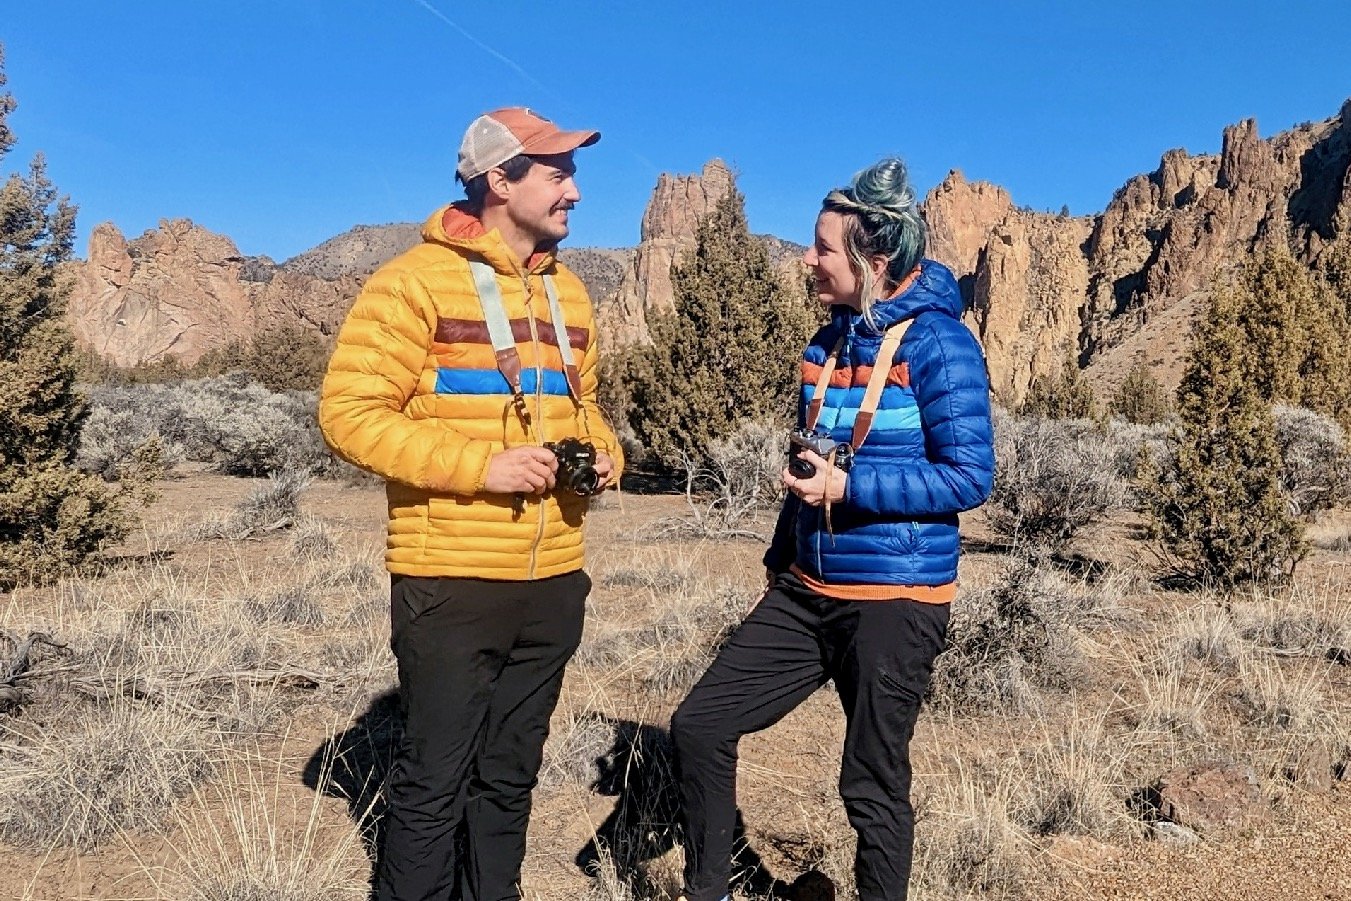 Two hikers wearing Cotopaxi Fuego Down jackets in a mountainous desert landscape